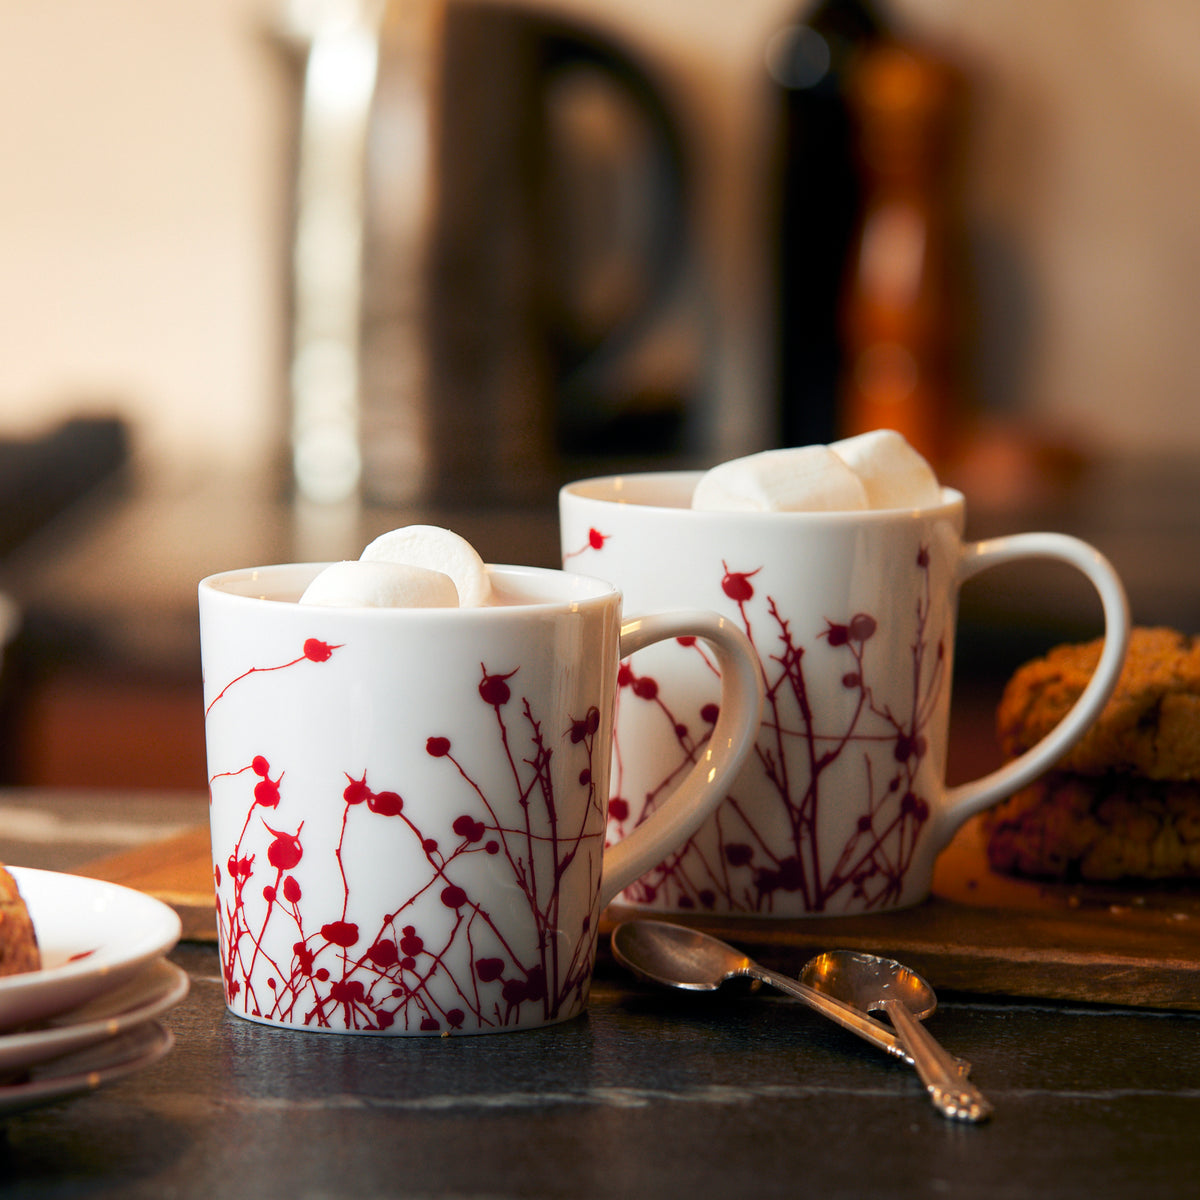 Two generously sized Winterberries Mugs by Caskata Artisanal Home, filled with hot drinks topped with marshmallows, are on a creamy white porcelain kitchen counter. Spoons lie in front, and cookies rest nearby. Blurred background shows kitchen items.